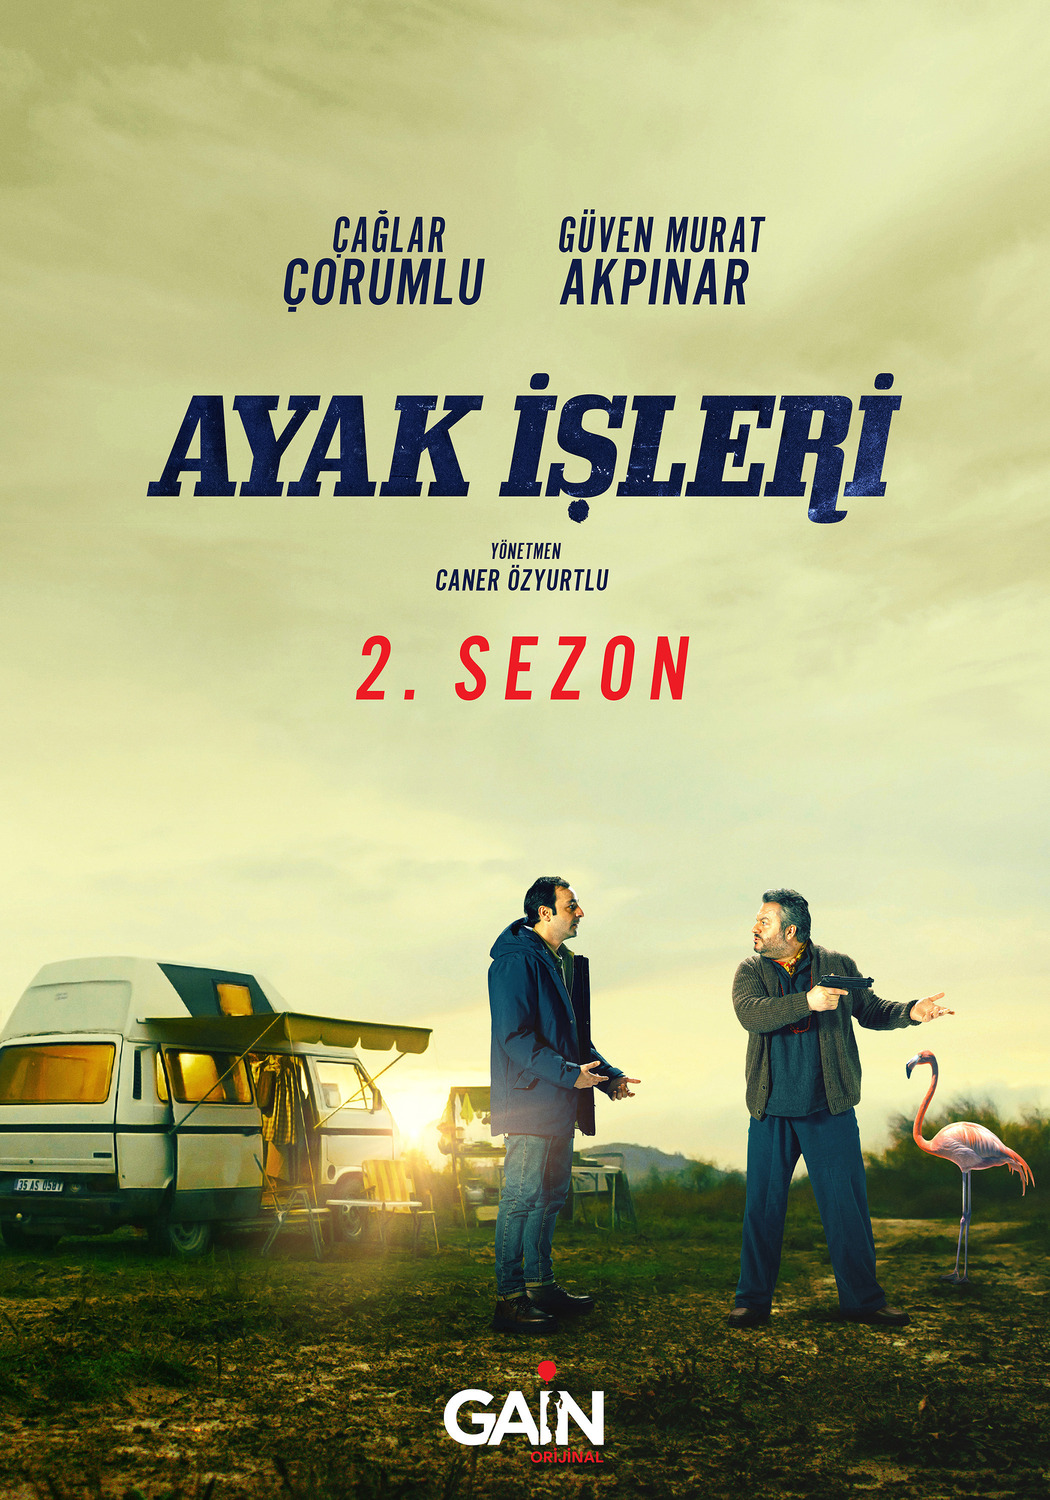 Extra Large TV Poster Image for Ayak Isleri (#3 of 8)